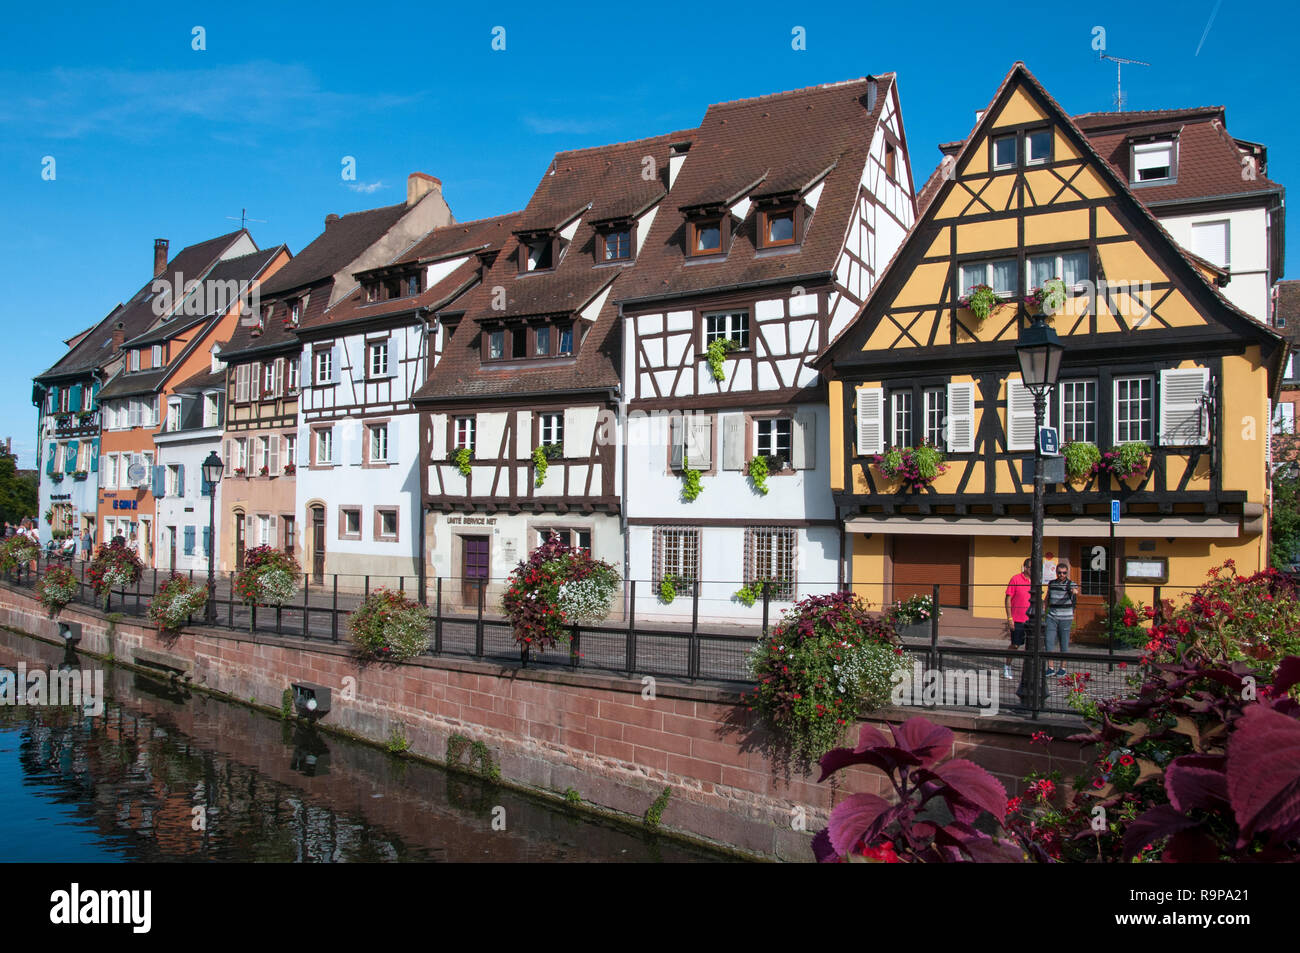 Canalside houses in Colmar, Alsace, France Stock Photo